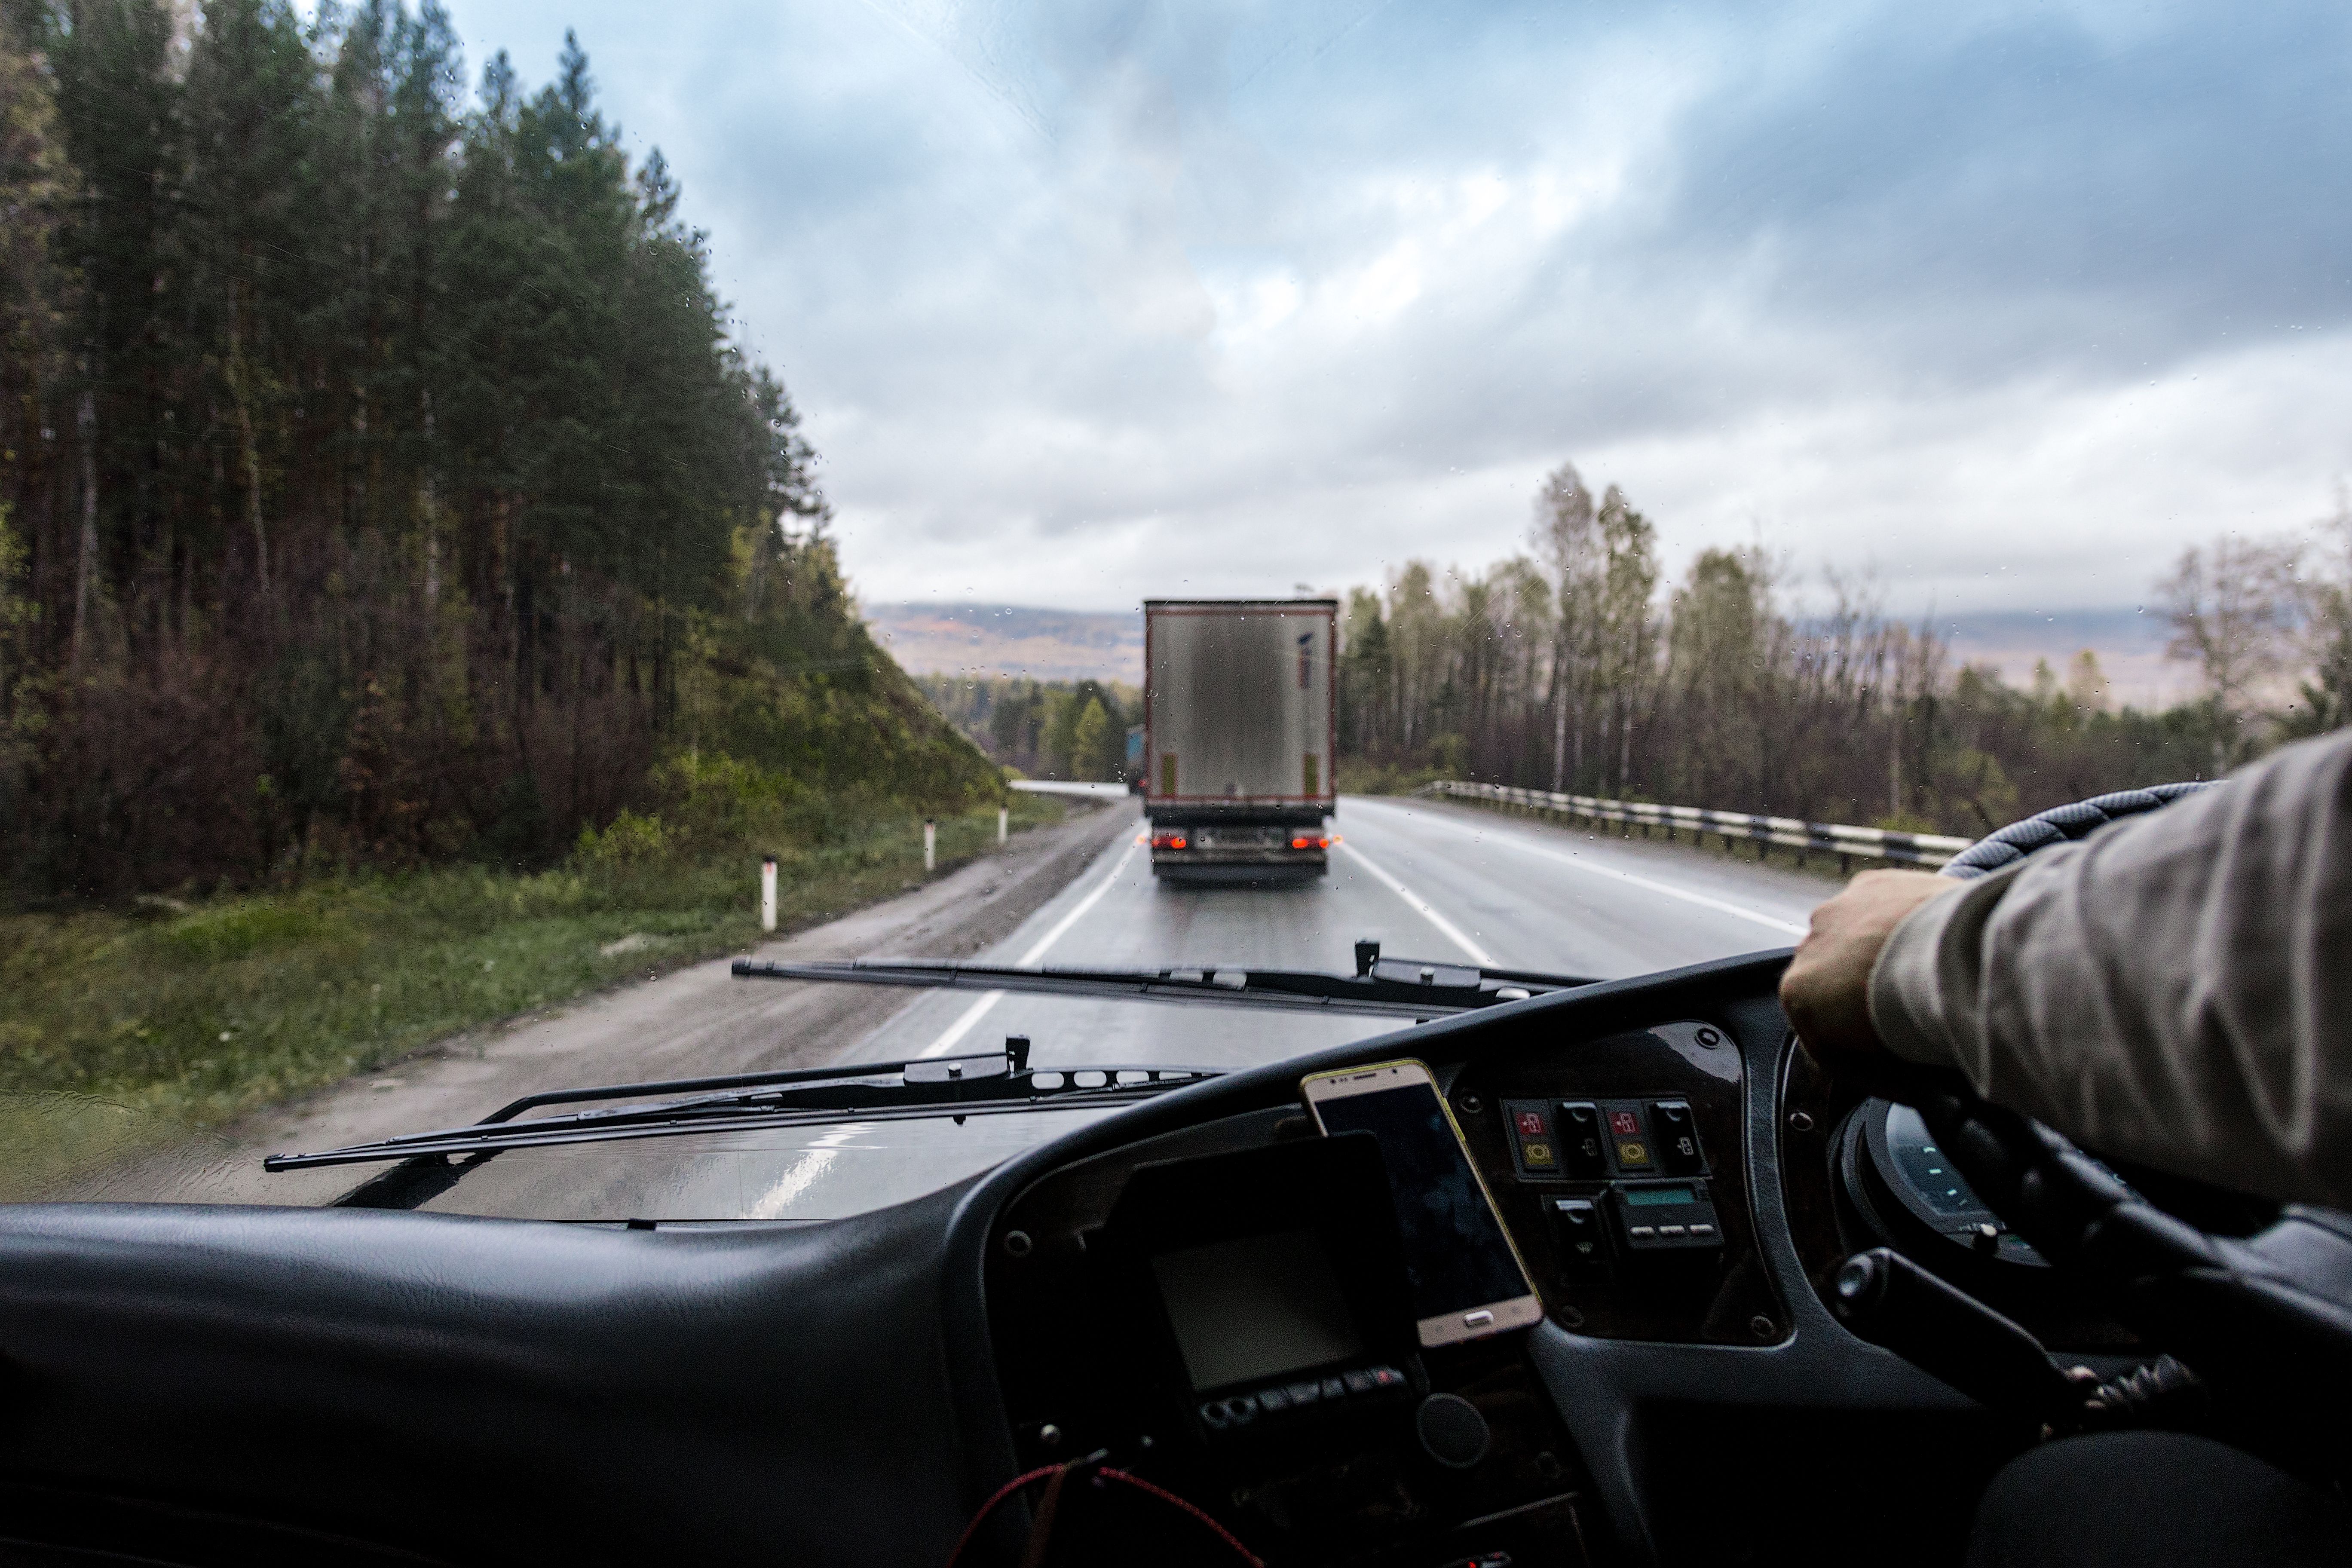 In cabin view of a truck driver driving down a road.